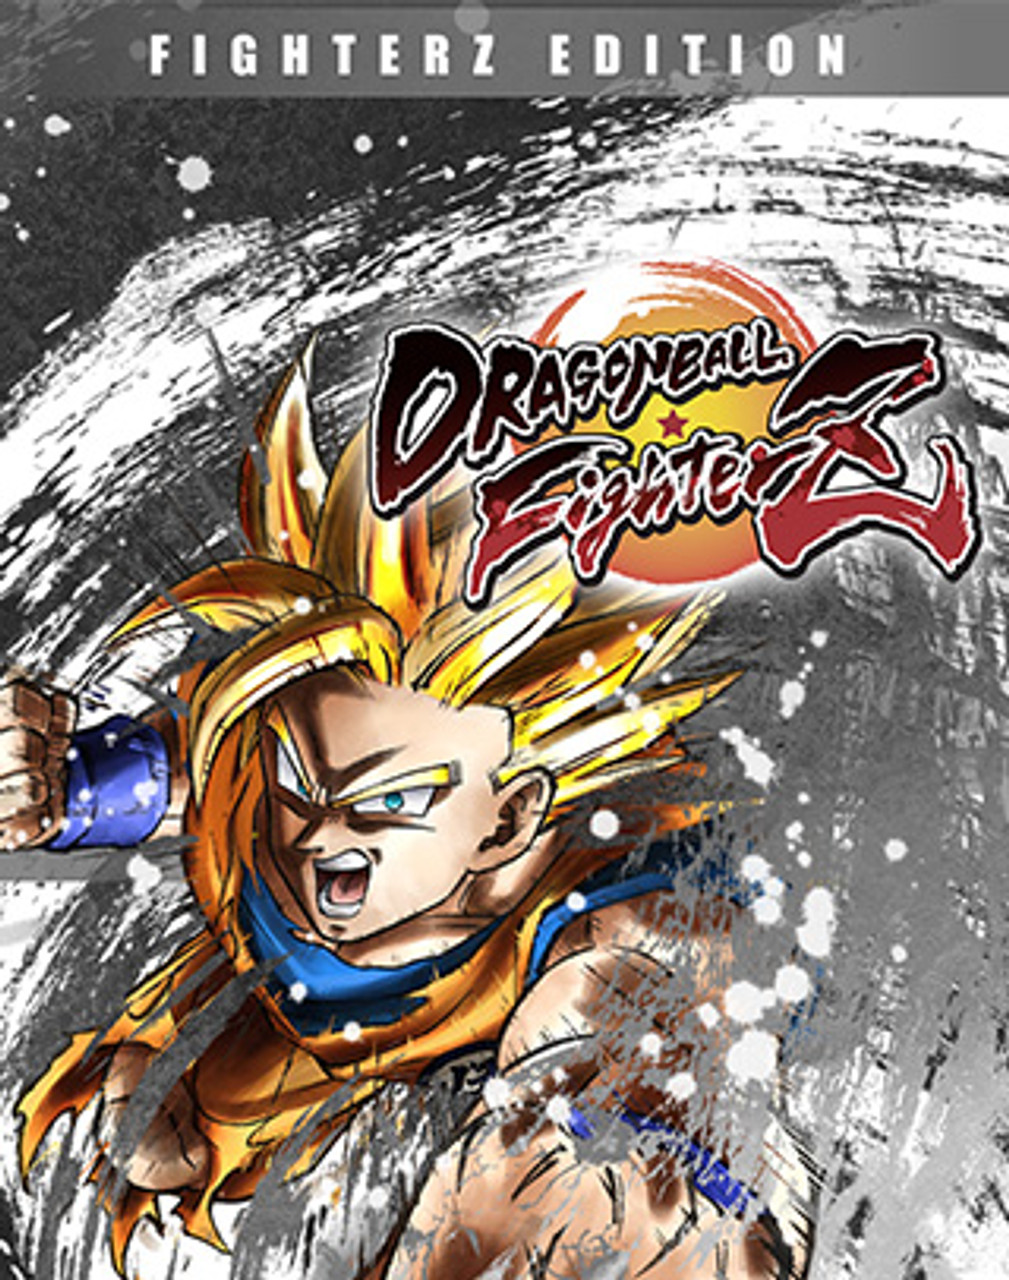 Dragon Ball FighterZ (for PC) Review